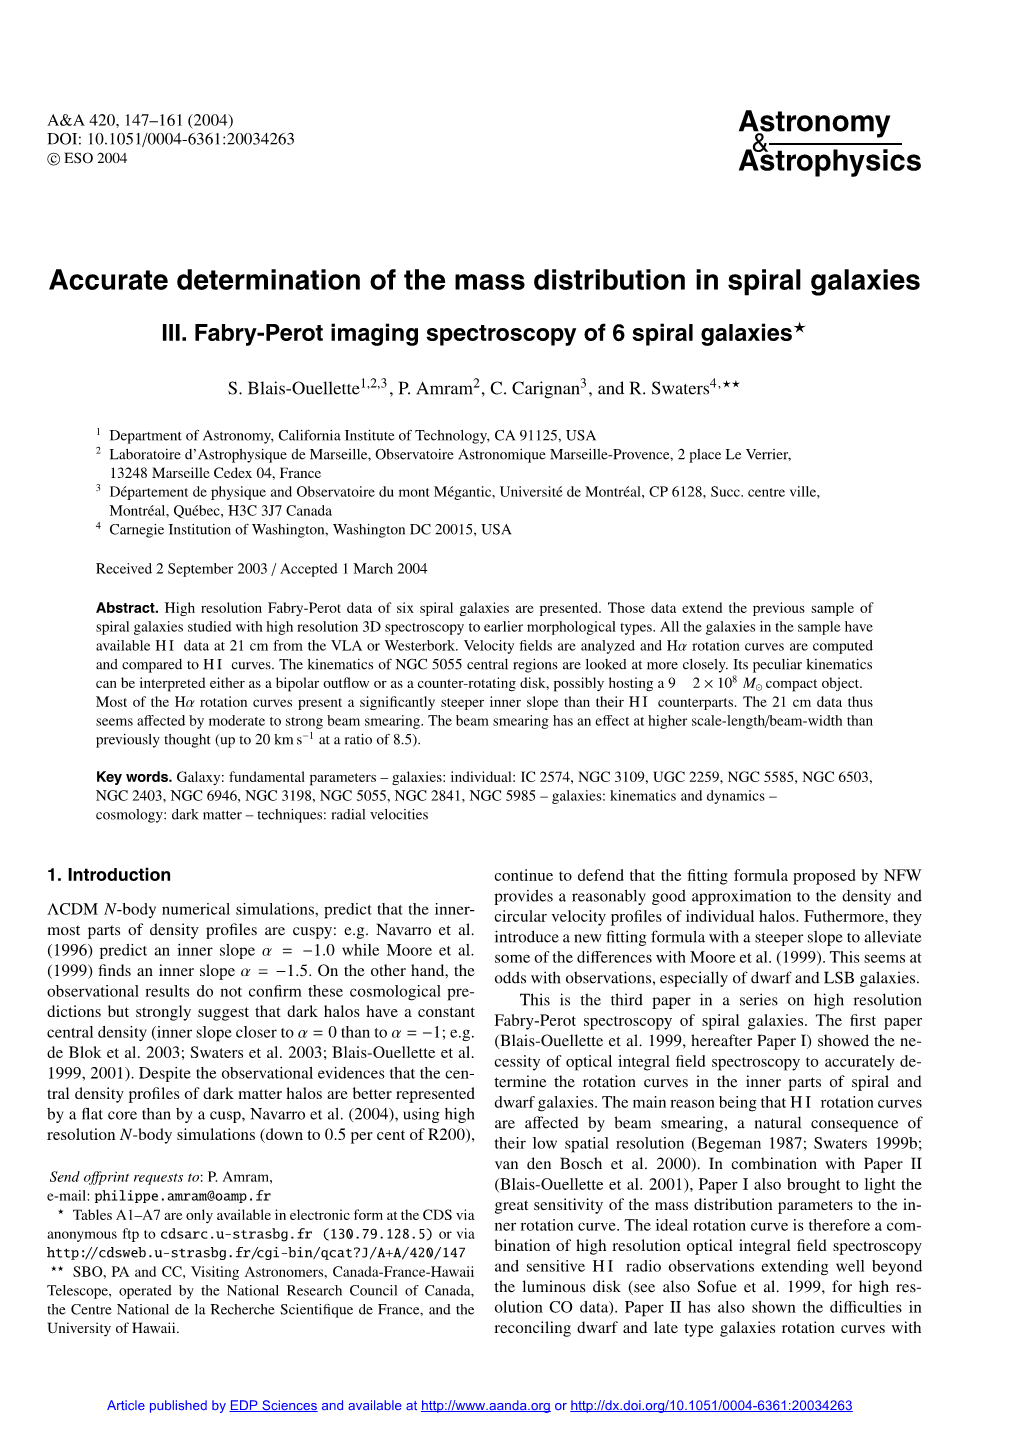 Accurate Determination of the Mass Distribution in Spiral Galaxies